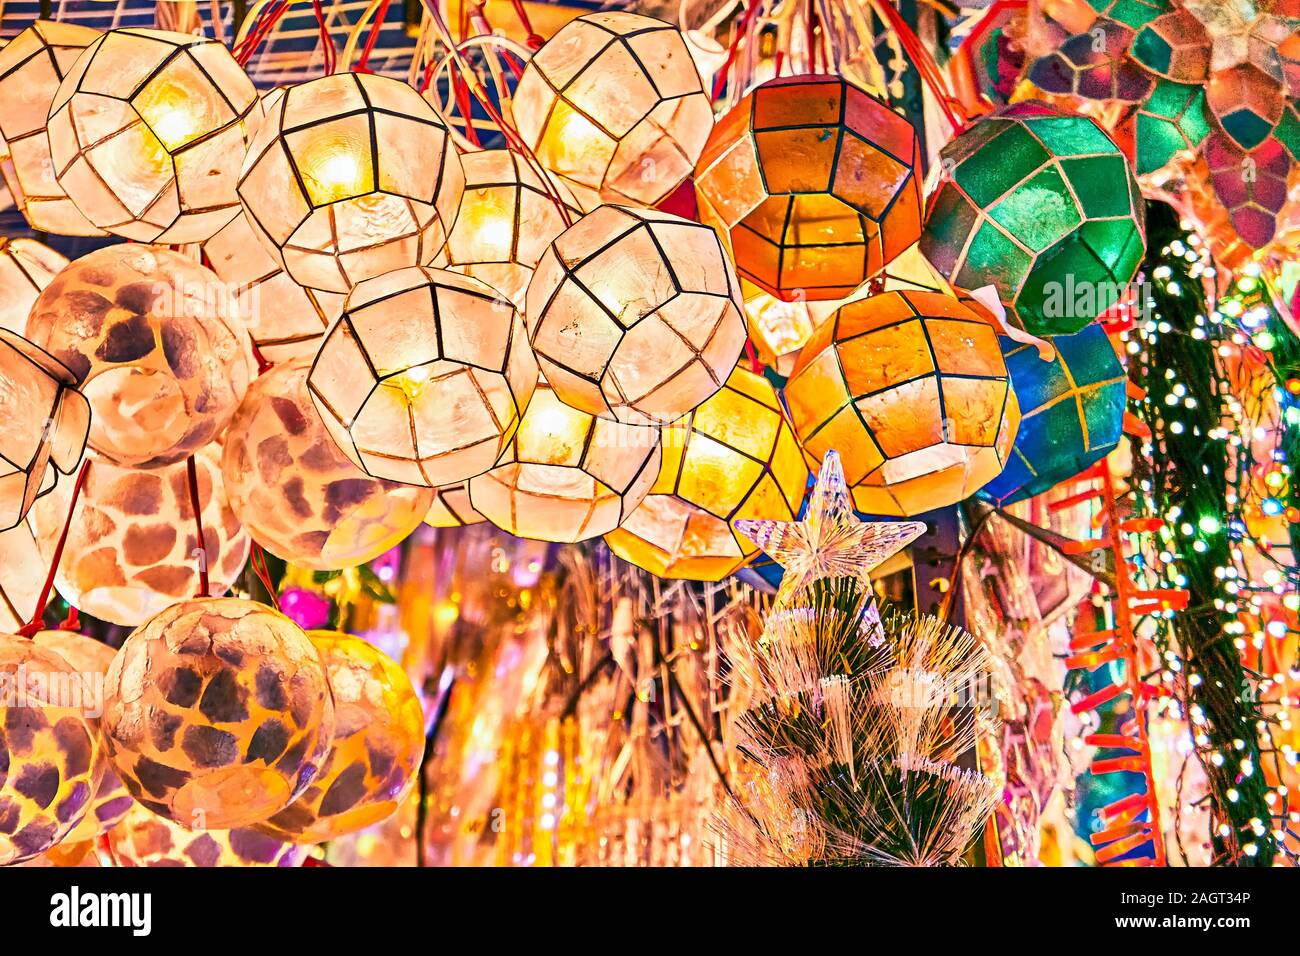 Brightly illuminated colorful traditional lanterns made of thin sea shells hanging outside a shop at Divisoria market in Manila, Philippines. Stock Photo